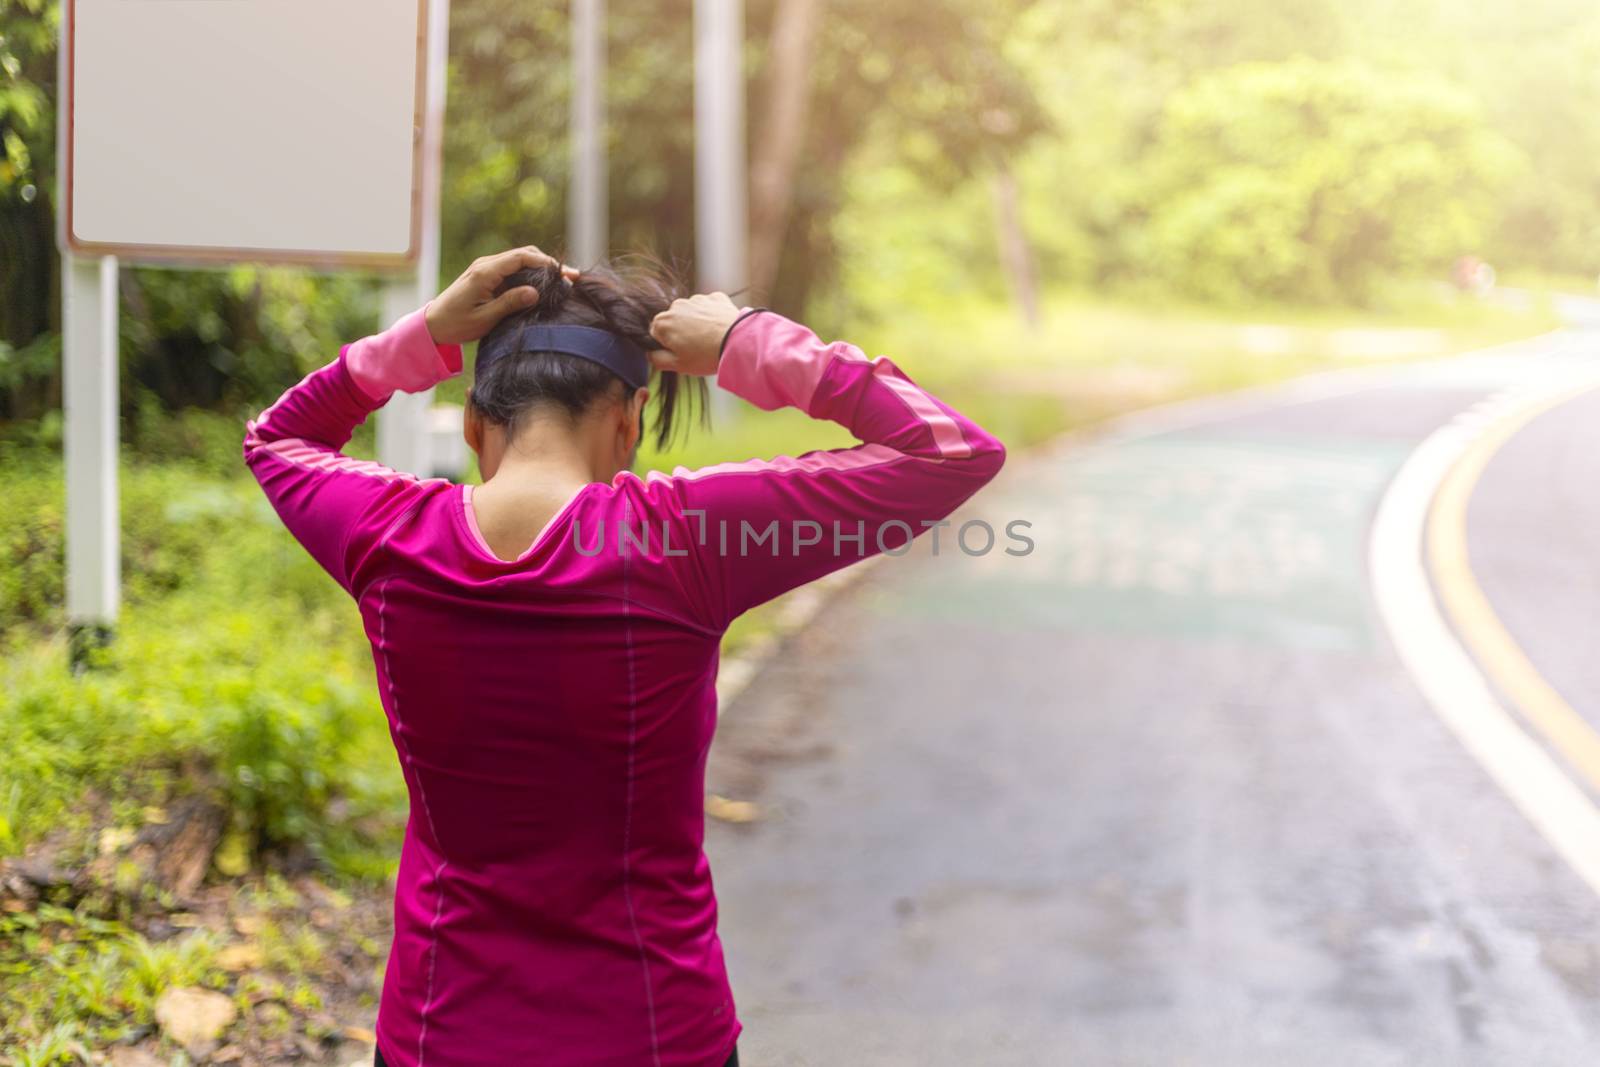 Women with pink long sleeve tied her hair before runing on road in morning time.